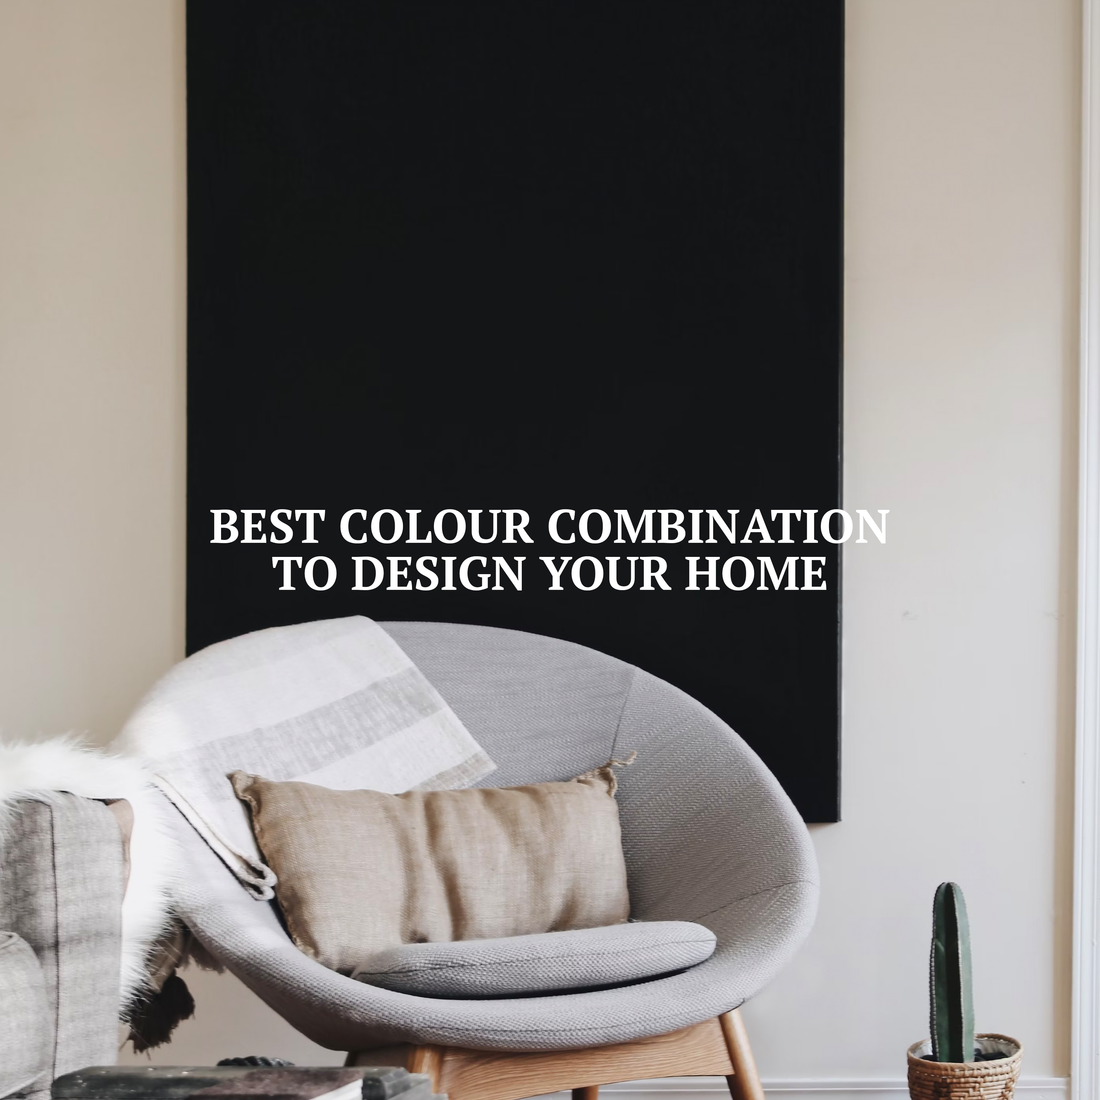 Best colour combination to design your home in 2023!